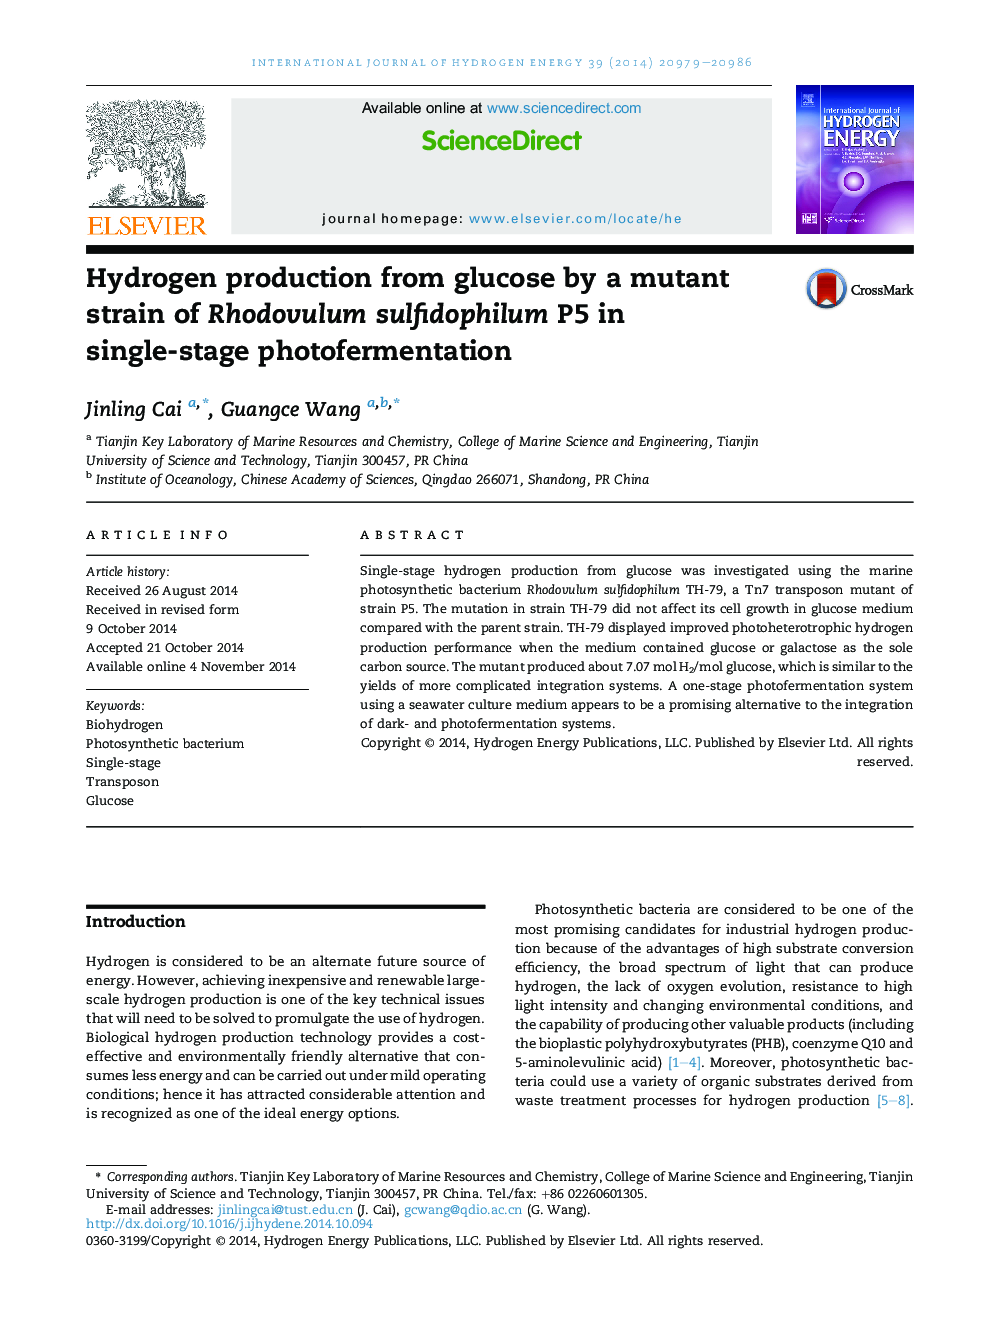 Hydrogen production from glucose by a mutant strain of Rhodovulum sulfidophilum P5 in single-stage photofermentation